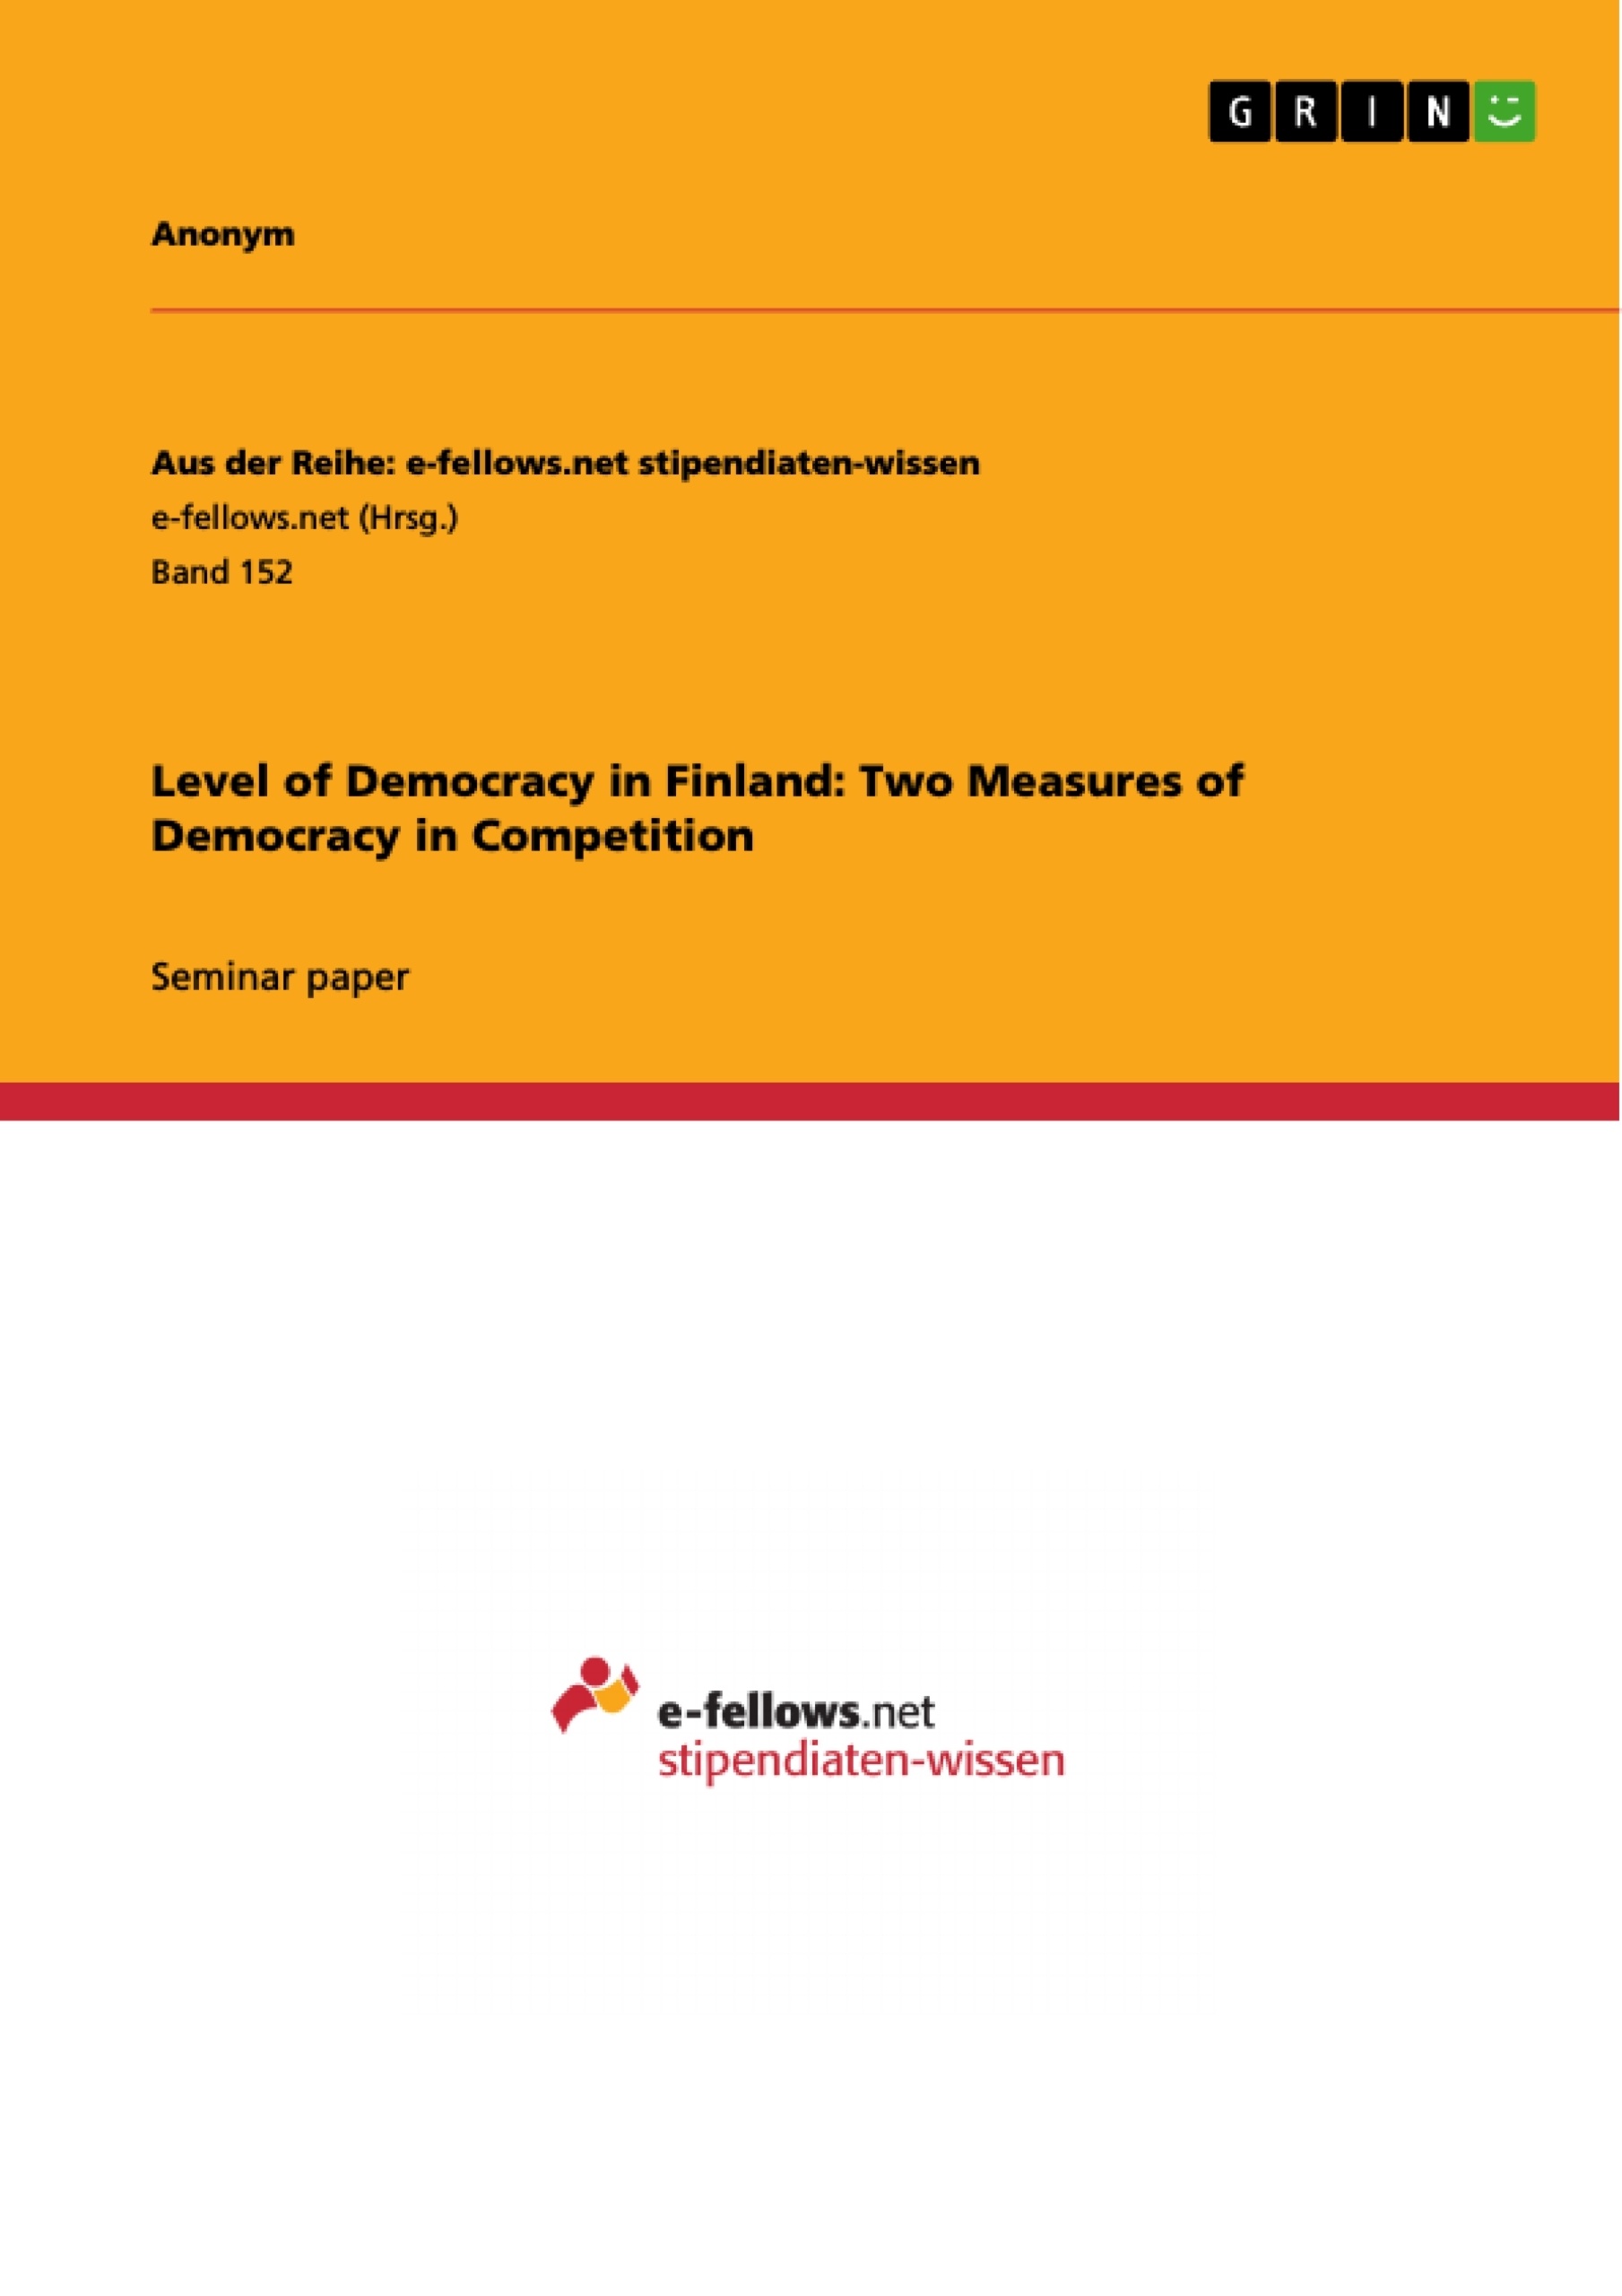 Title: Level of Democracy in Finland: Two Measures of Democracy in Competition